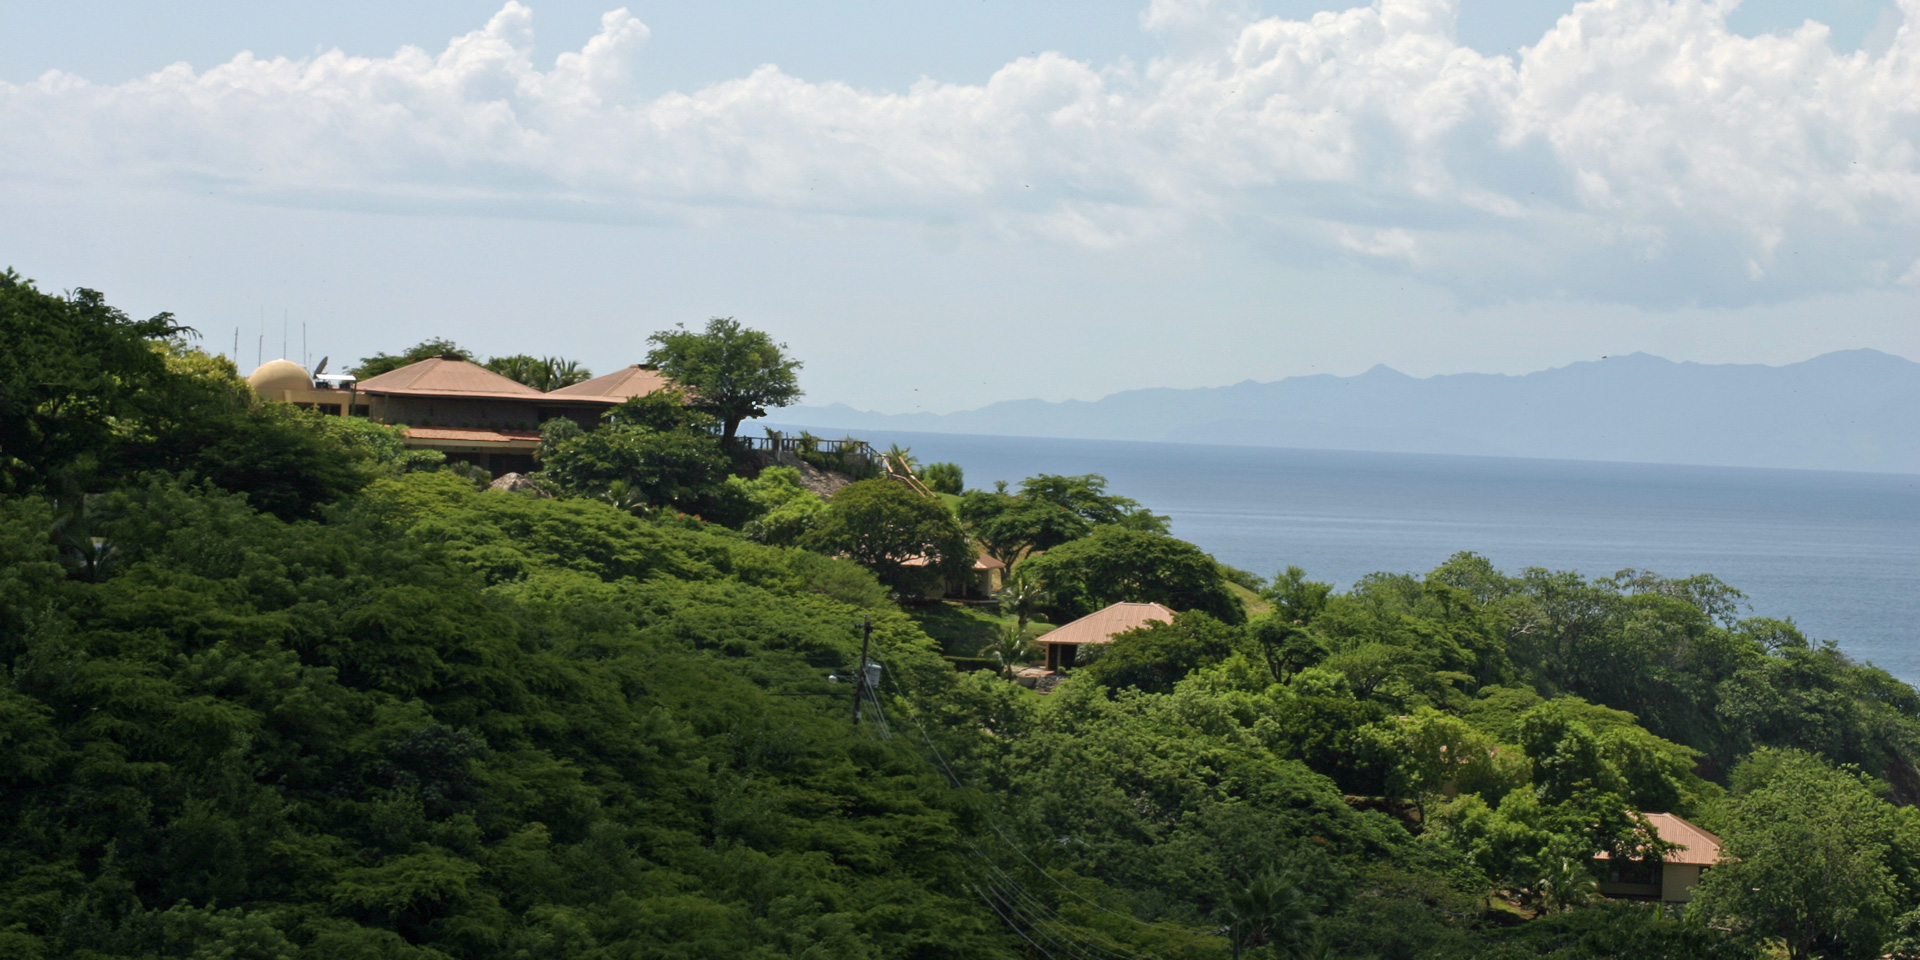 Distant view of Ocotal Beach Resort, displaying the club house, lush vegetation, duplex villas peeking through the foliage, and the breathtaking sea with mountains across the bay